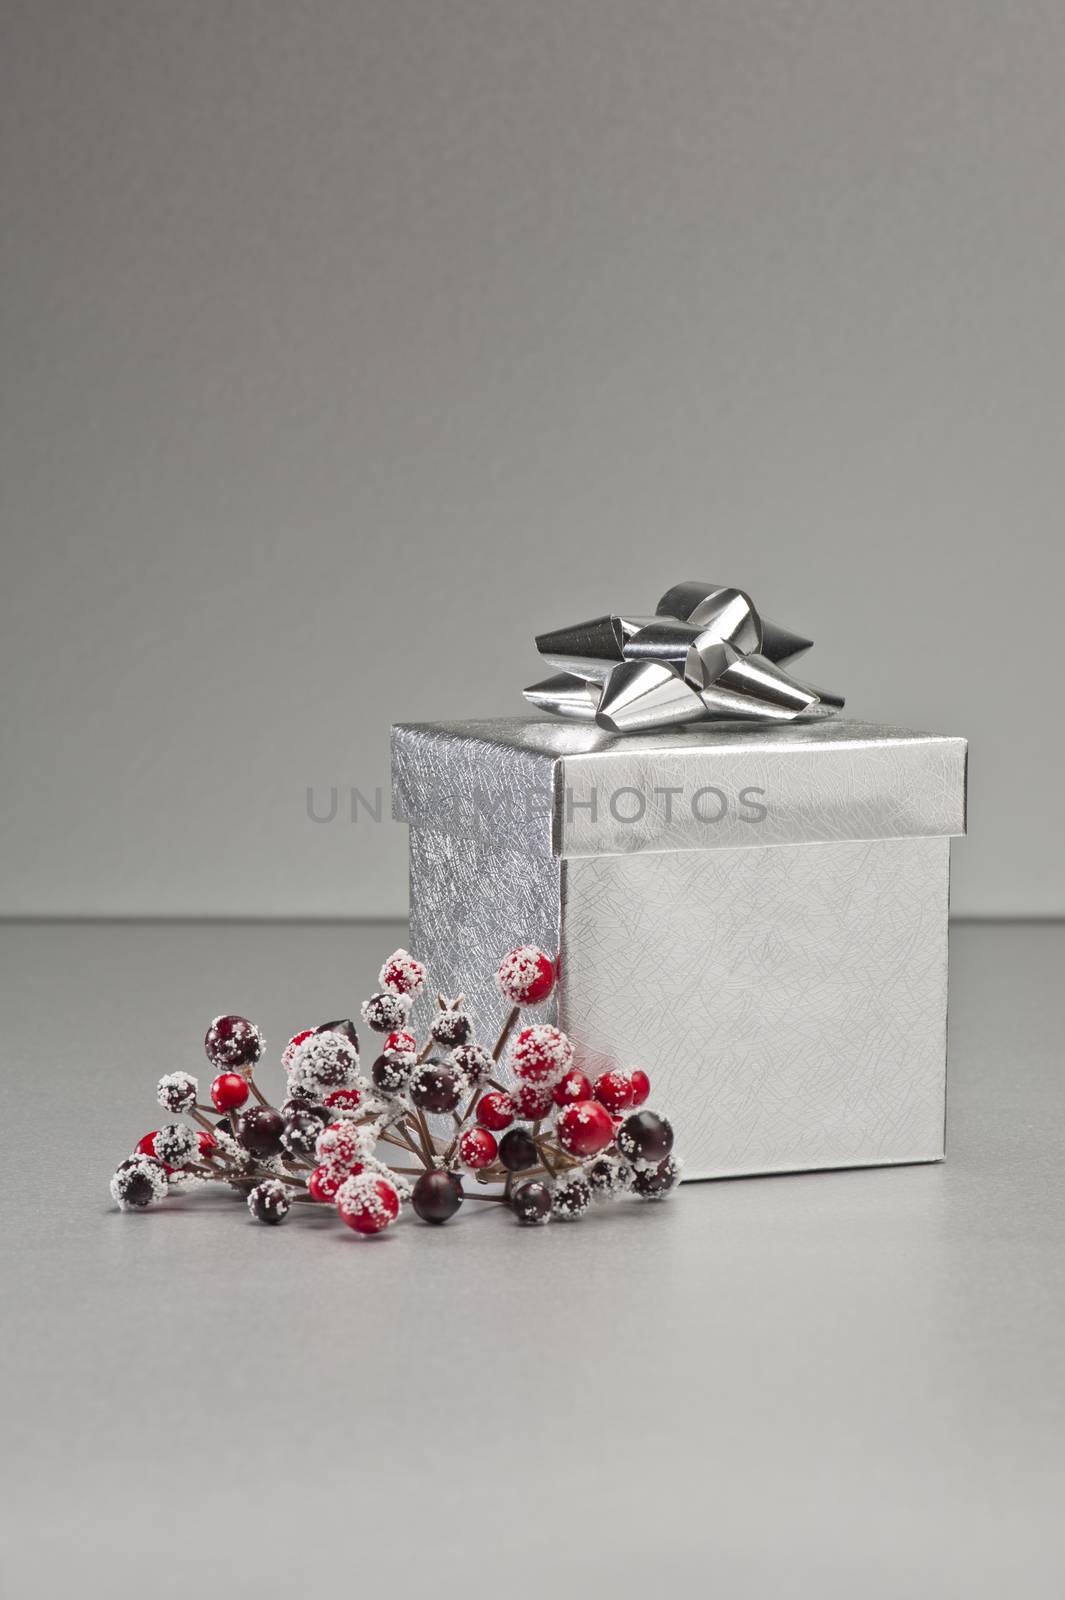 Silver present in Christmas setting with red green deco